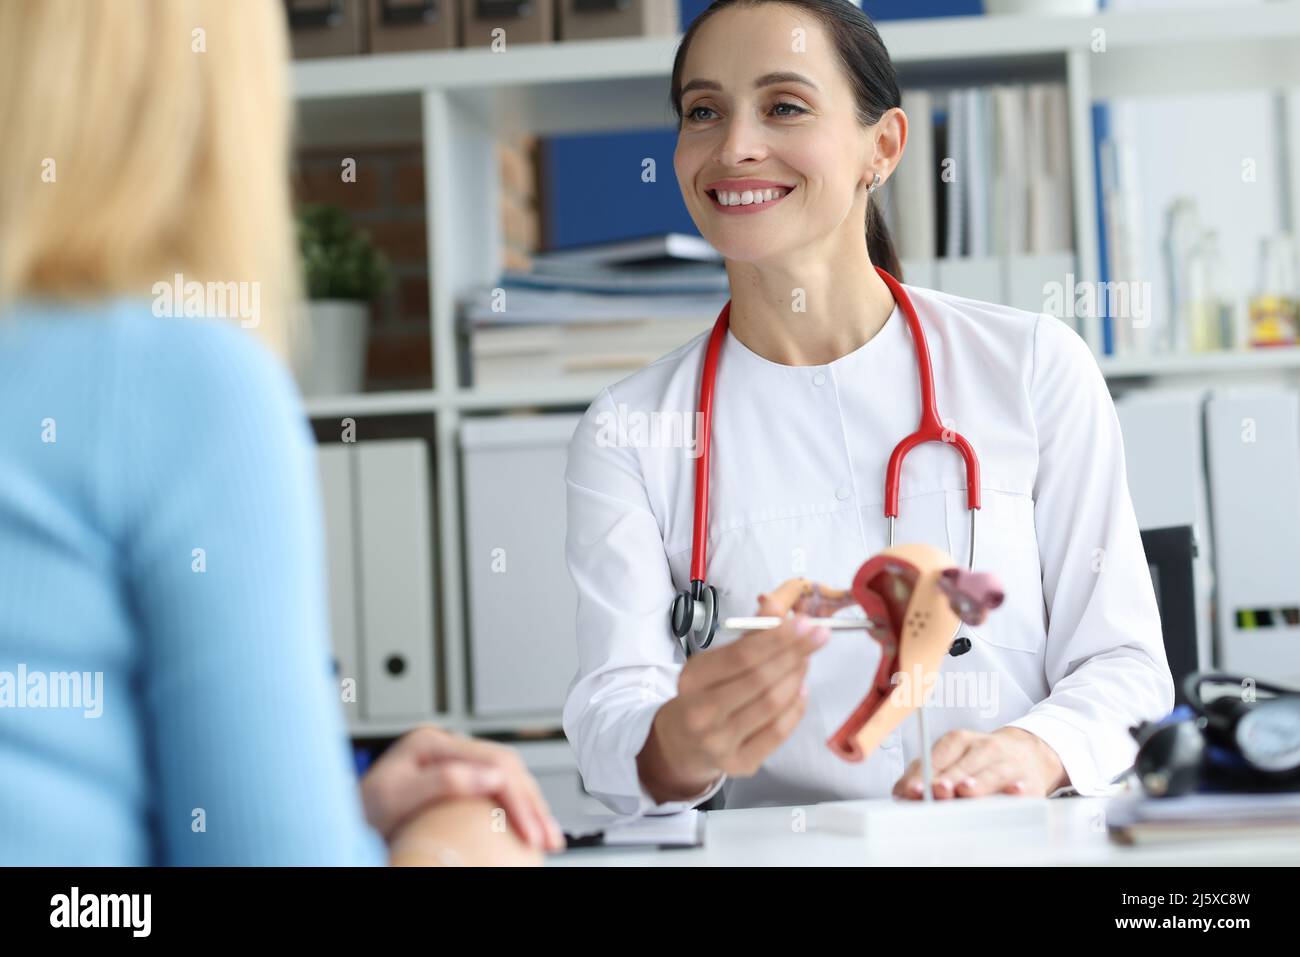 Doctor gynecologist showing and explaining female patients gynecological diseases on model of uterus and ovaries Stock Photo